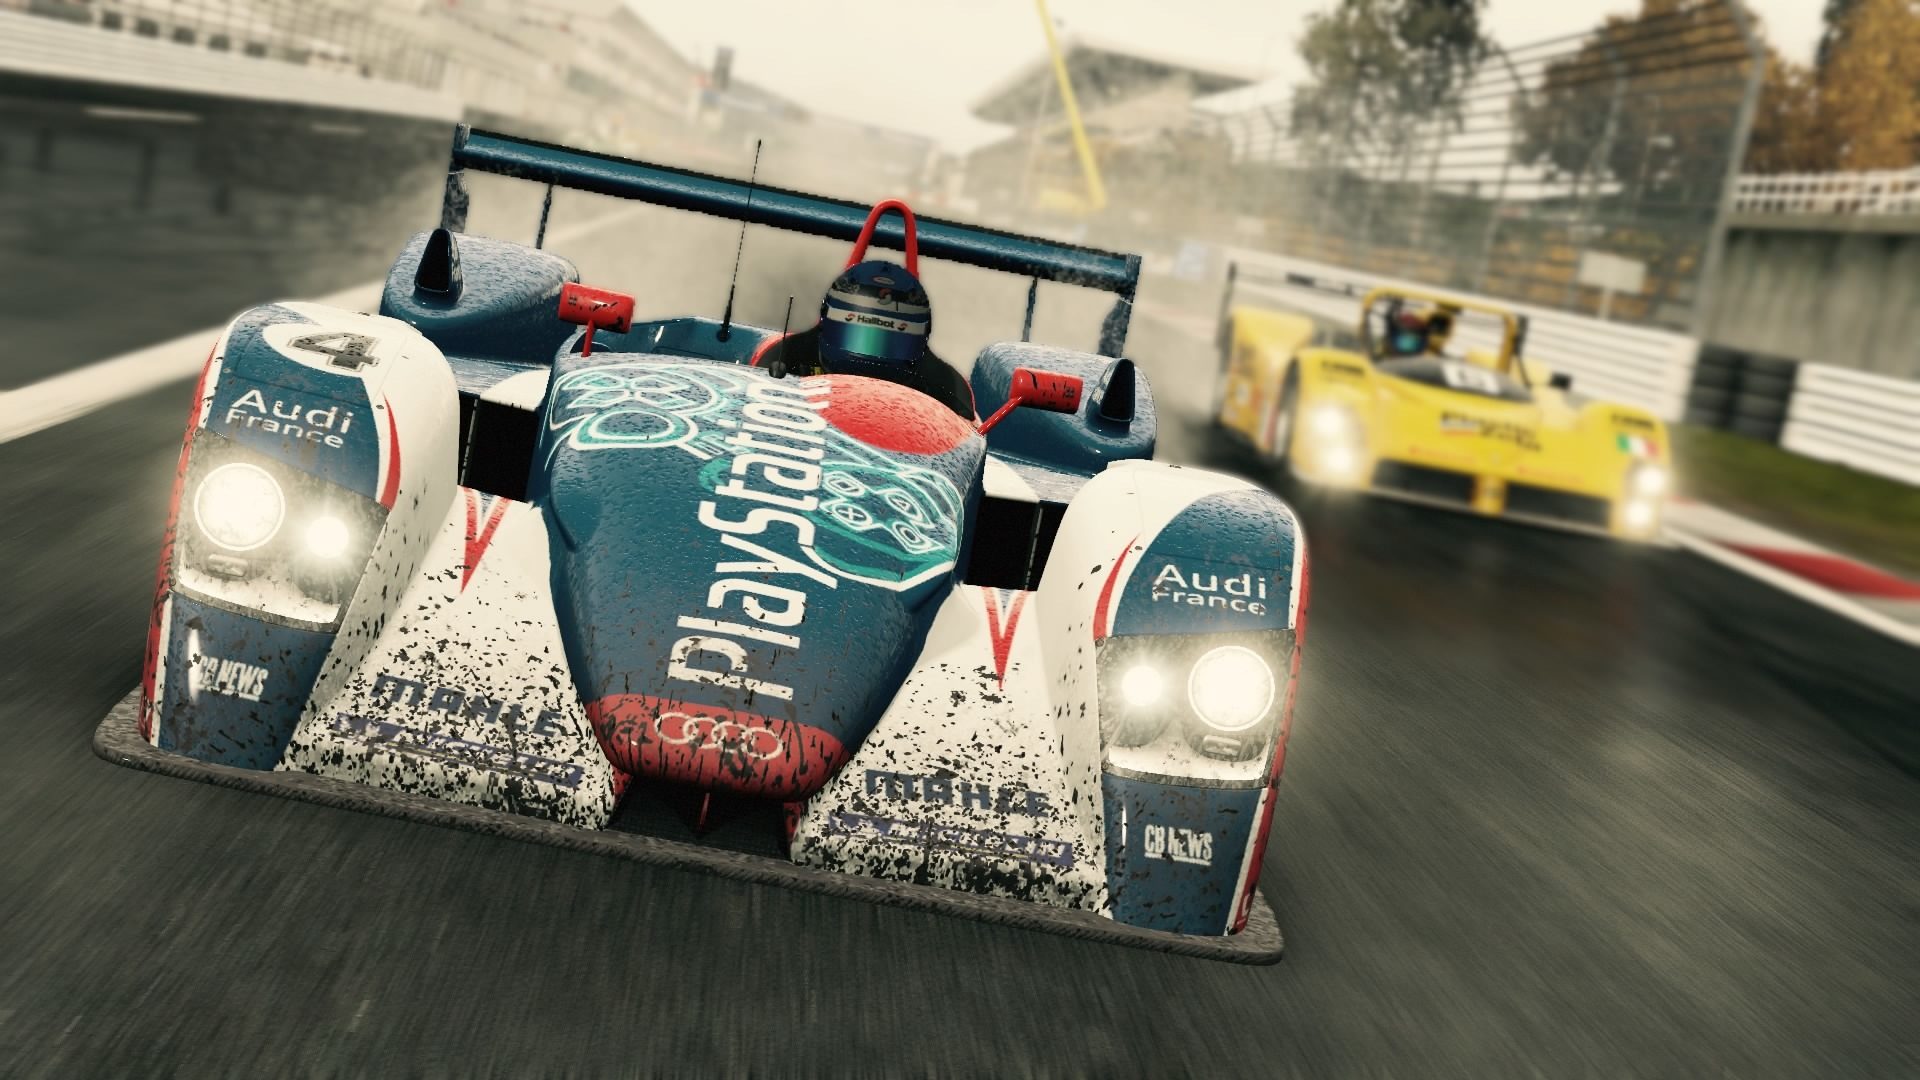 Ps4 project. Project cars ps4. Project cars 2. Cars 2 ps4. PLAYSTATION 4 Project cars.